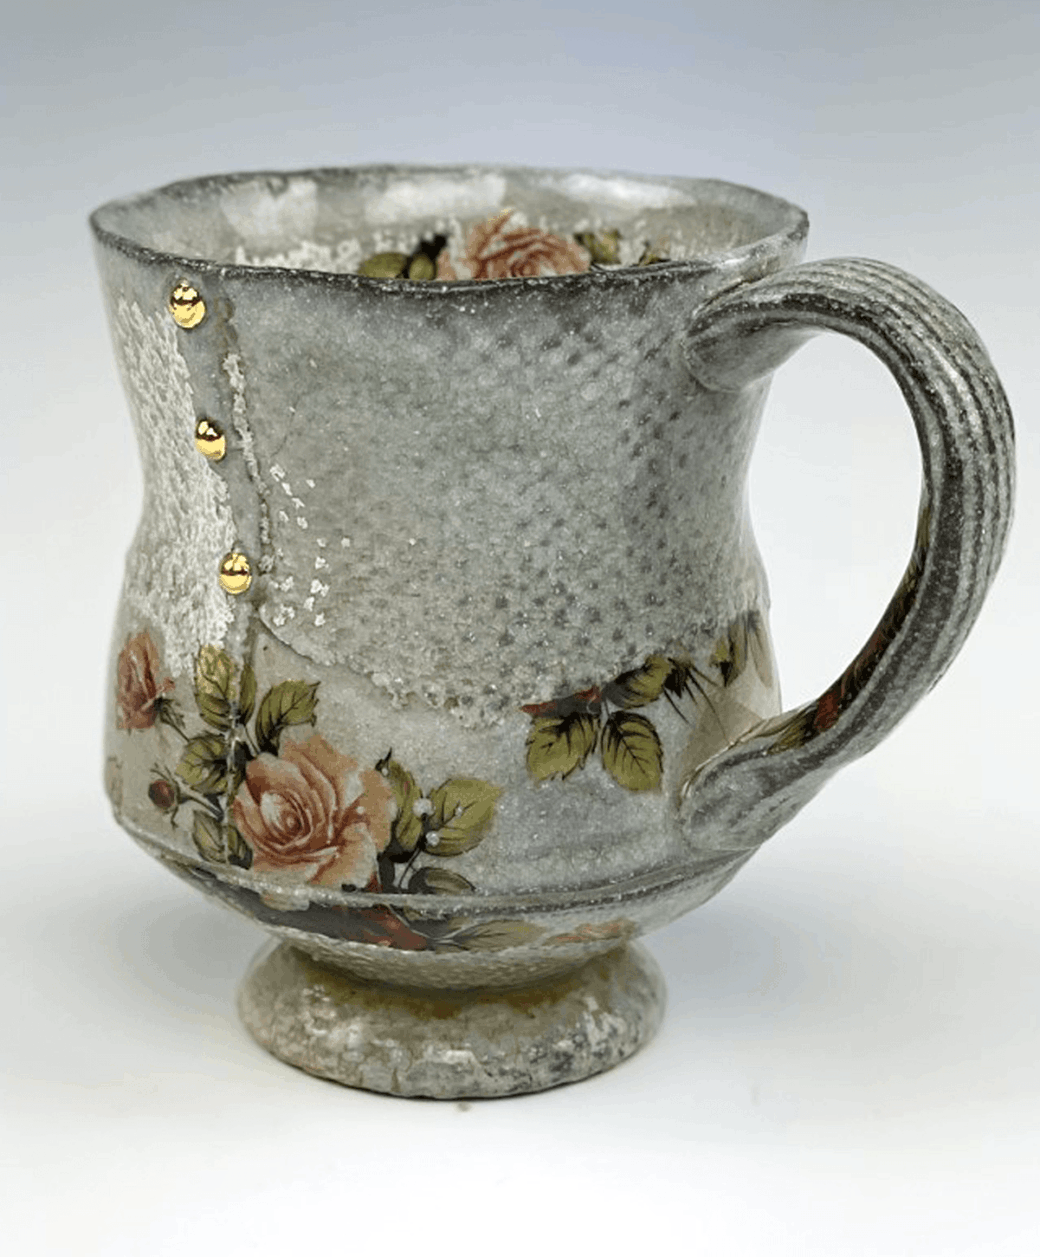 Ceramic mug with roses and gold luster